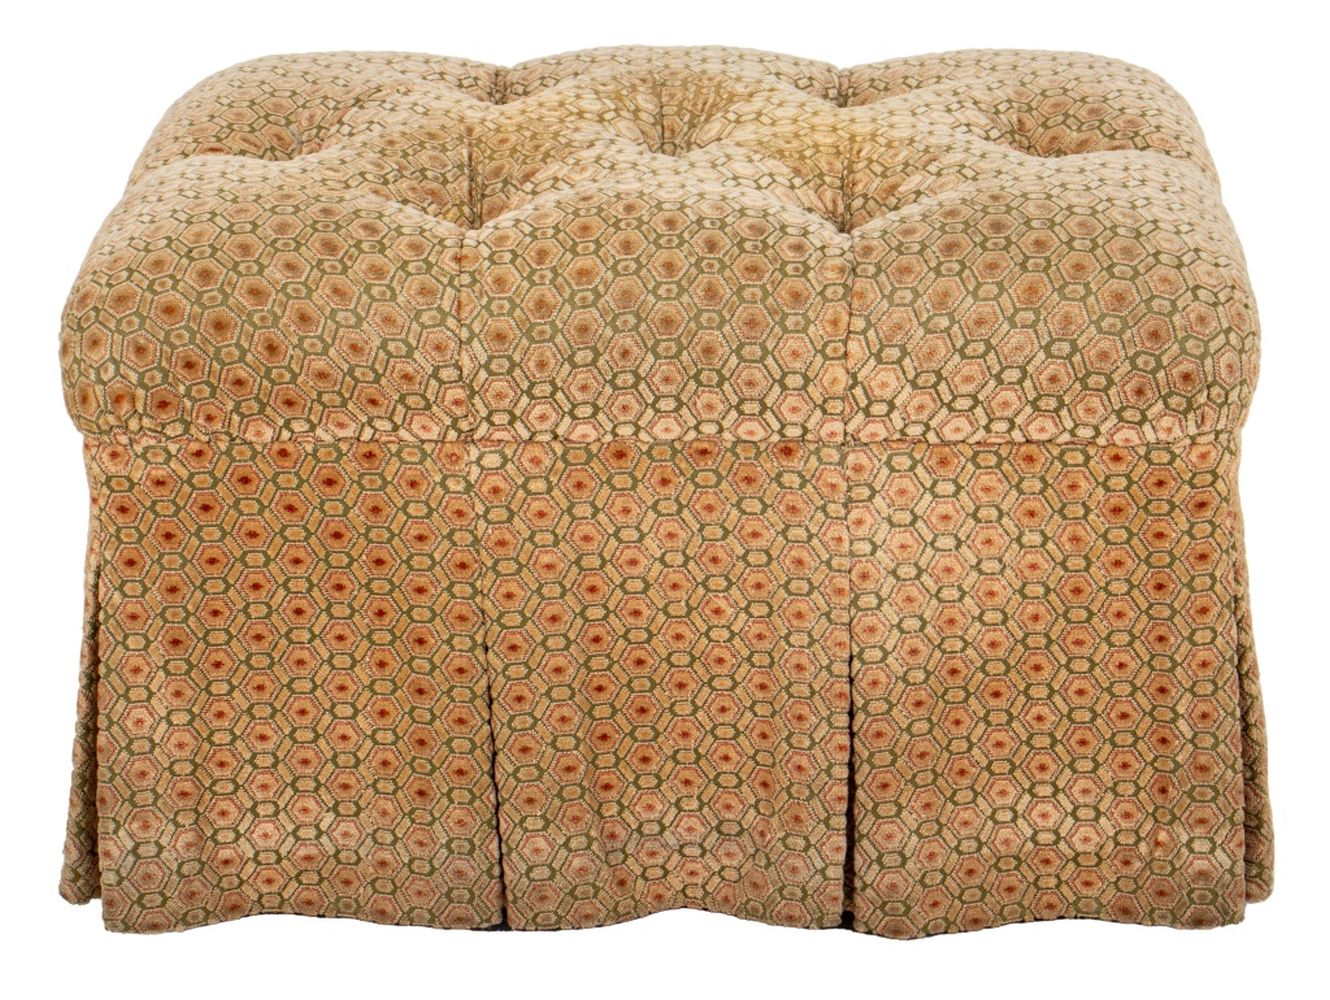 BUTTON UPHOLSTERED OTTOMAN ON CASTERS 2bbd51